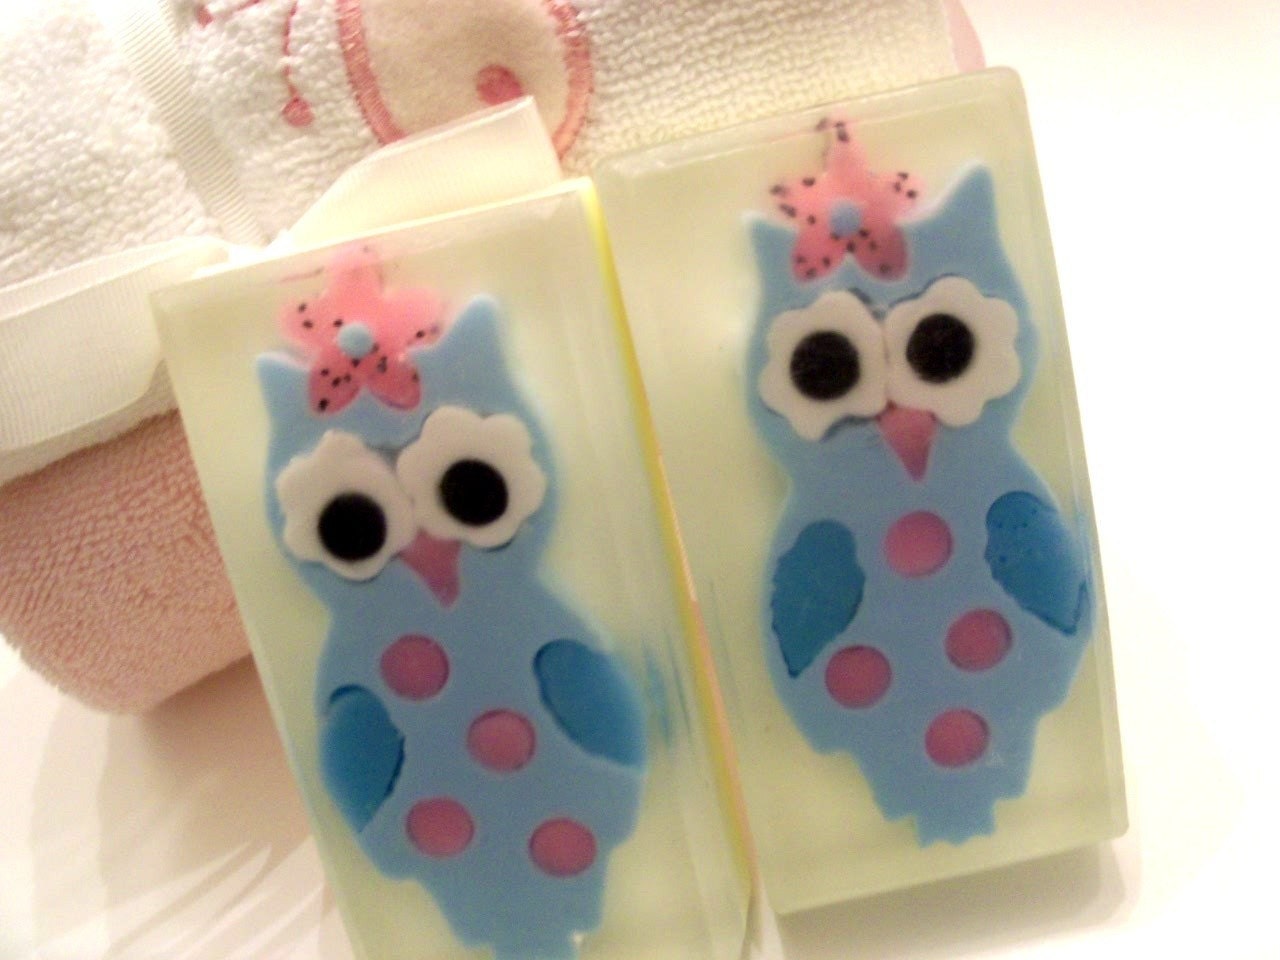 Owlivia Soap - Cotton Candy- Out of the Hootie and Owlivia Collection - Great for Gift Giving - Party Favors - Baby Showers - All Occasions